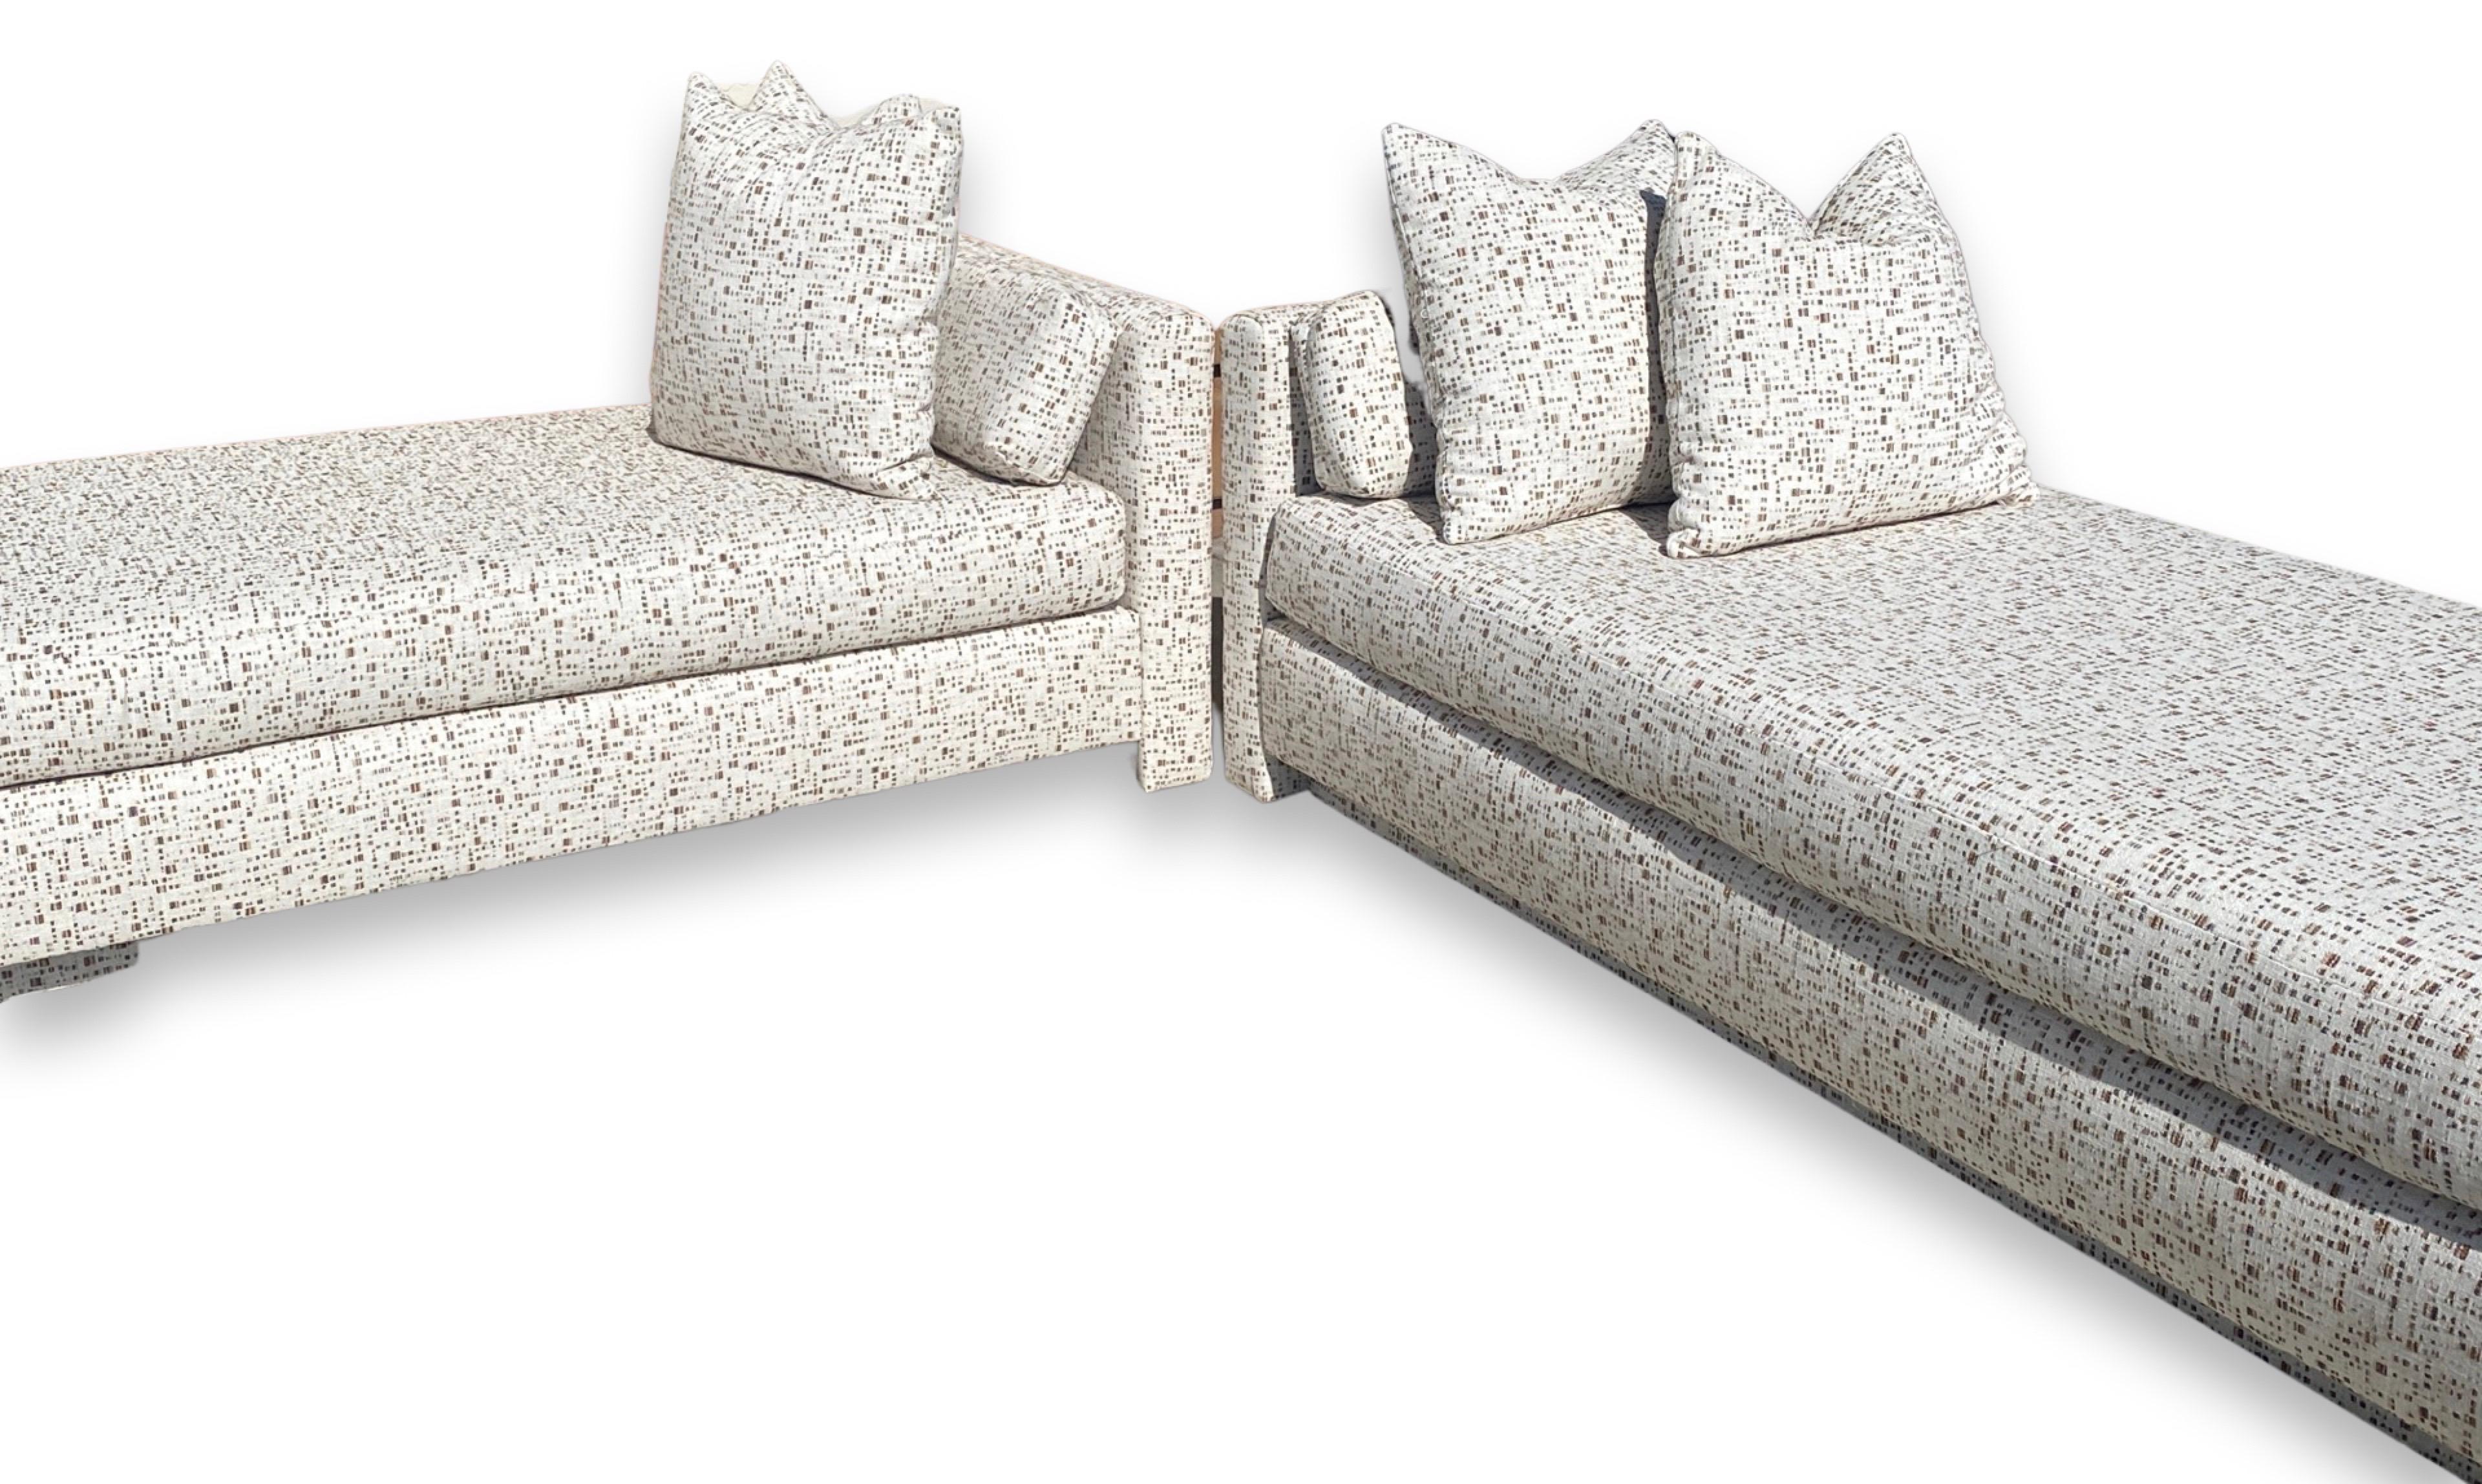 Sofa and Chaise Set in Modern Geometric Neutral Fabric in Style of Steve Chase For Sale 8